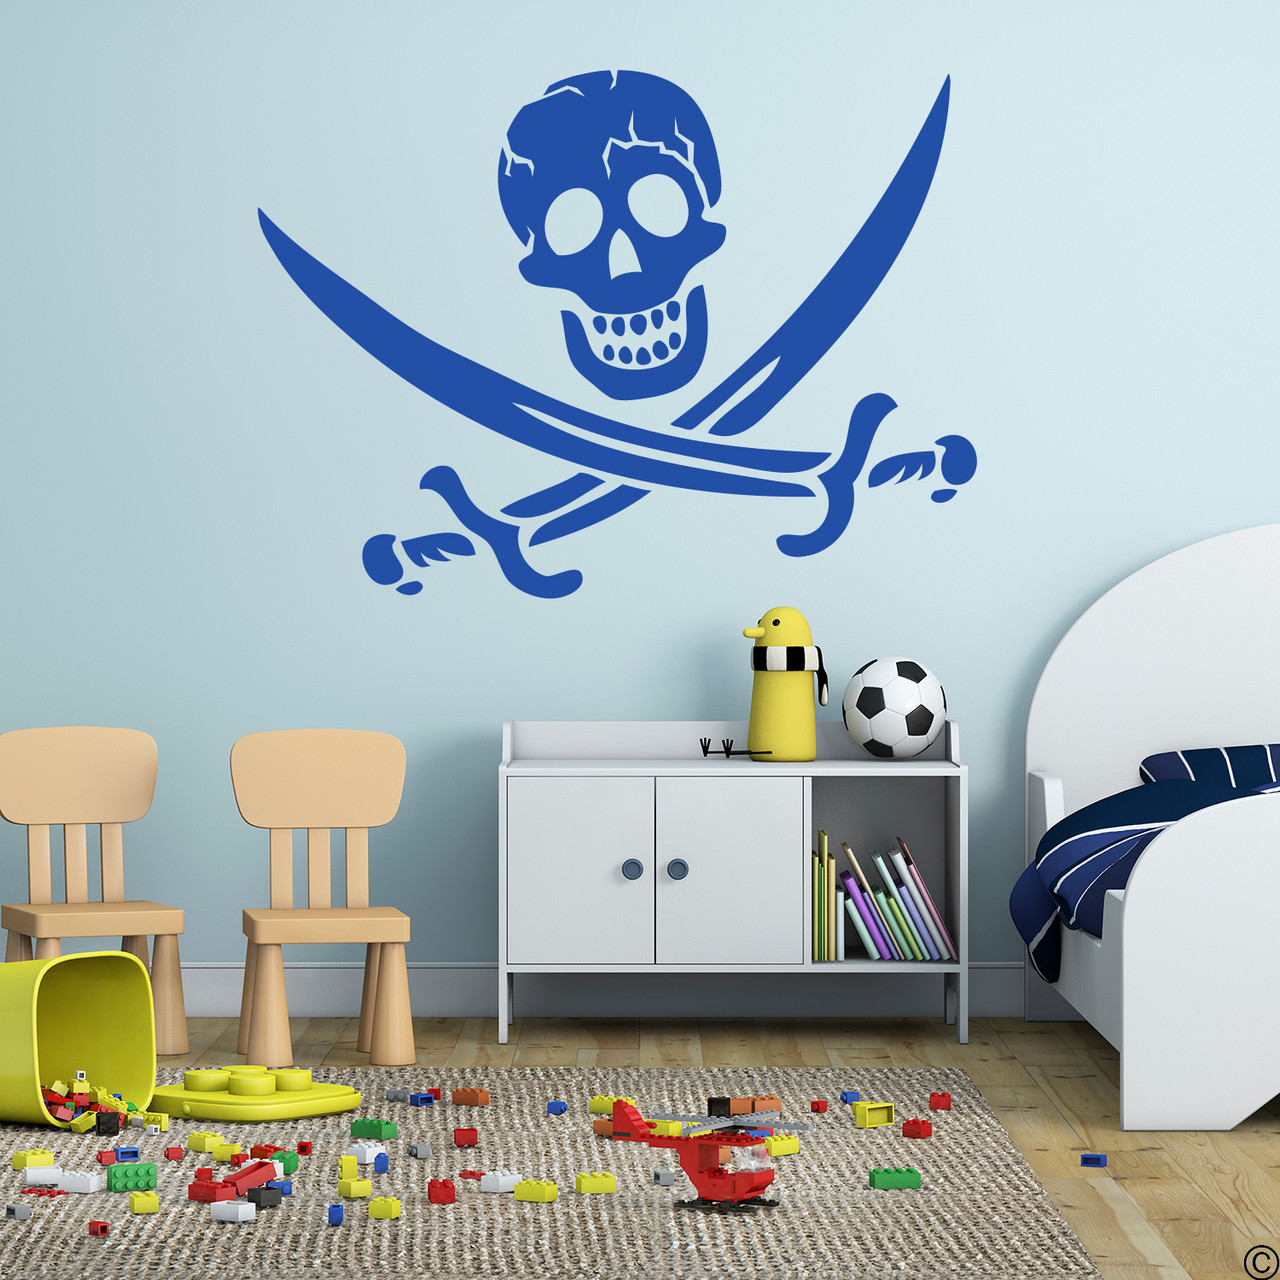 Eye patch jolly roger pirate vinyl wall decal in traffic blue